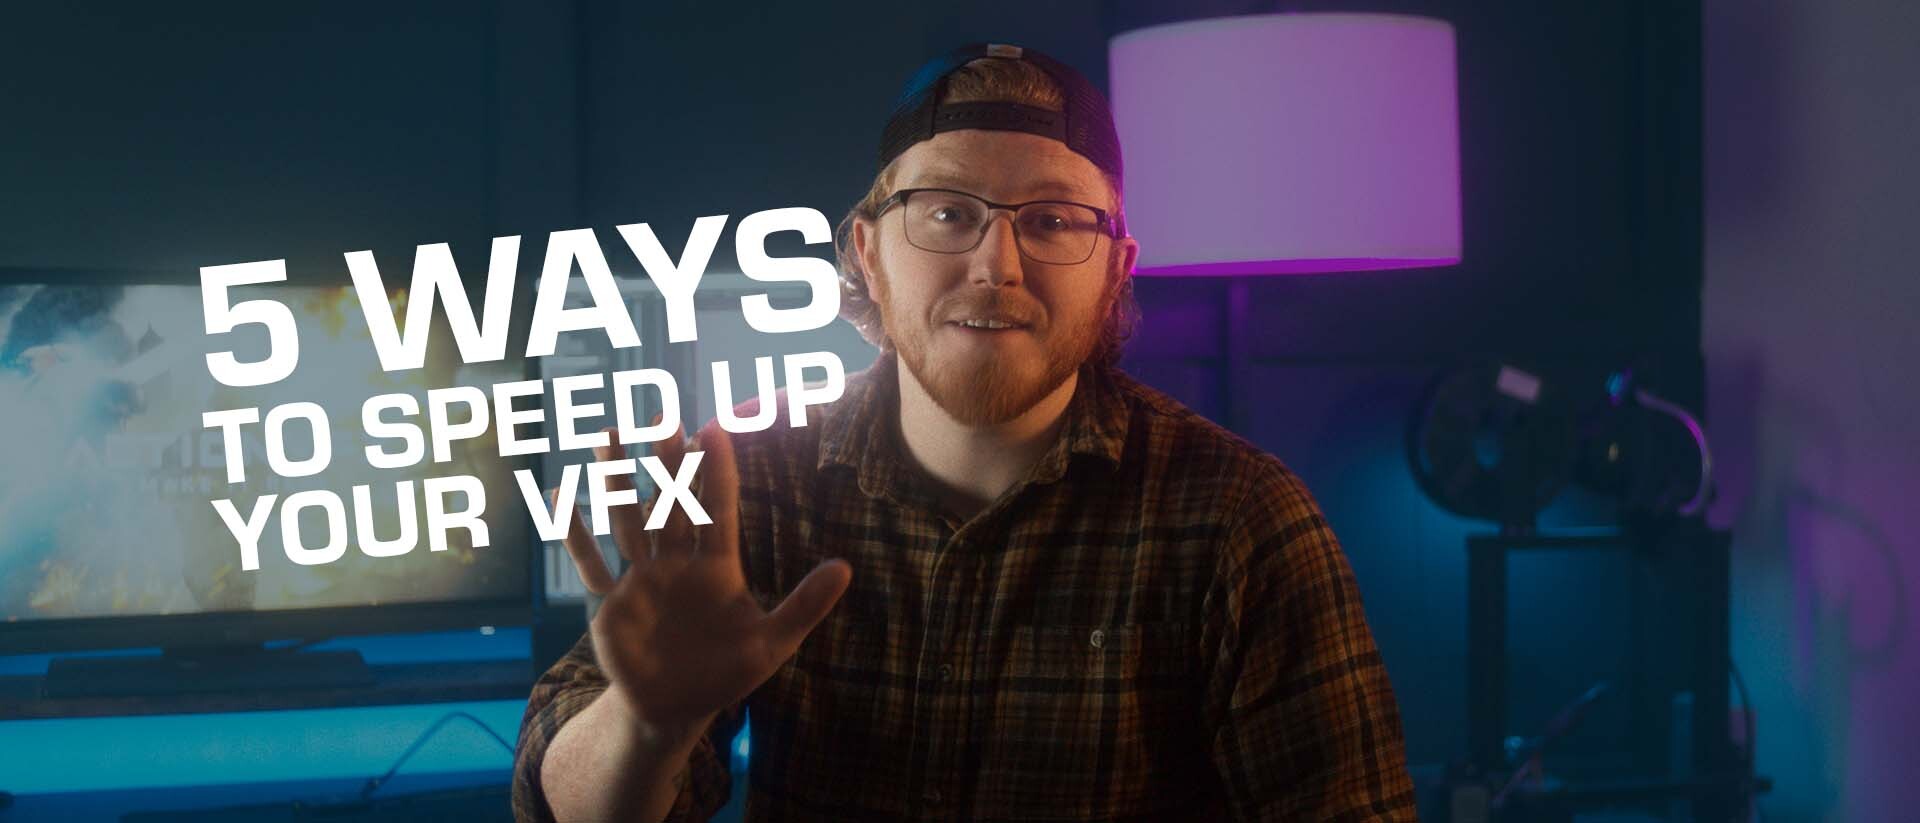 Watch: 5 Ways to Speed Up Your VFX Workflow in Less Than 1 Minute